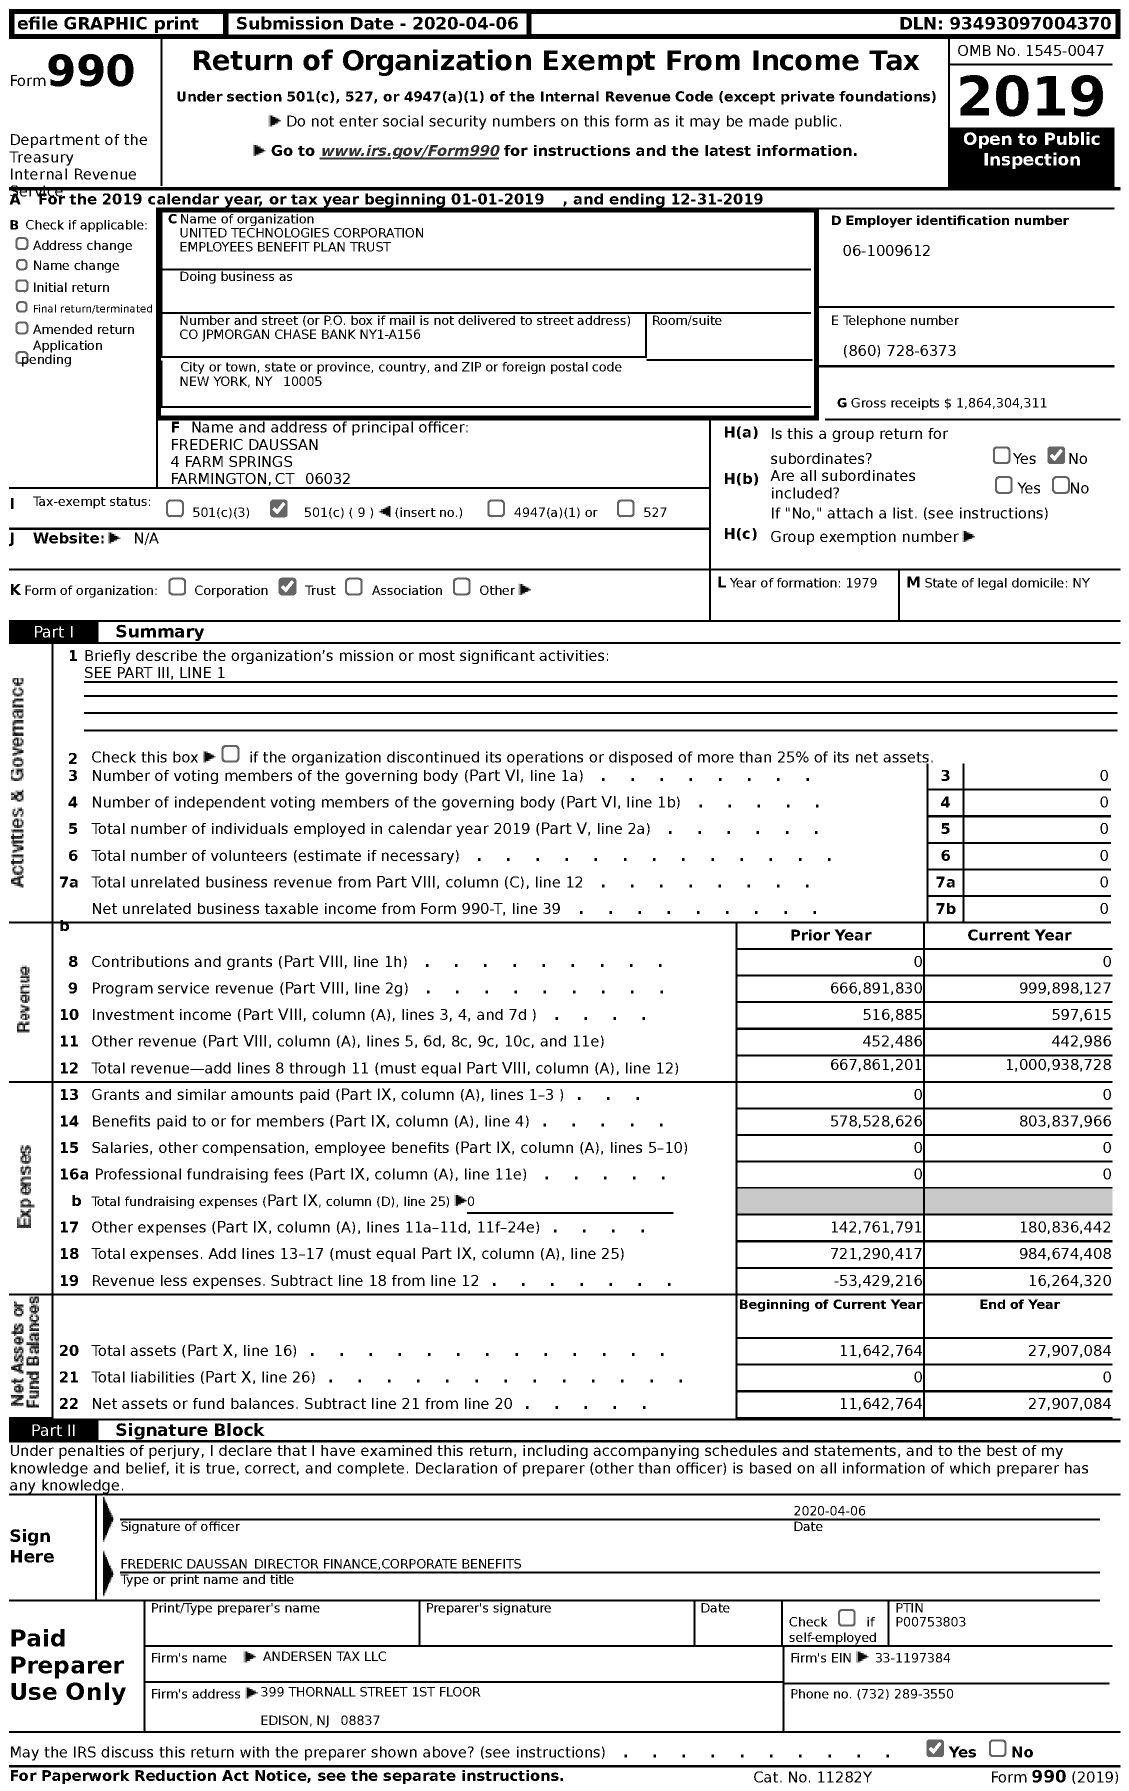 Image of first page of 2019 Form 990 for United Technologies Corporation Employees Benefit Plan Trust